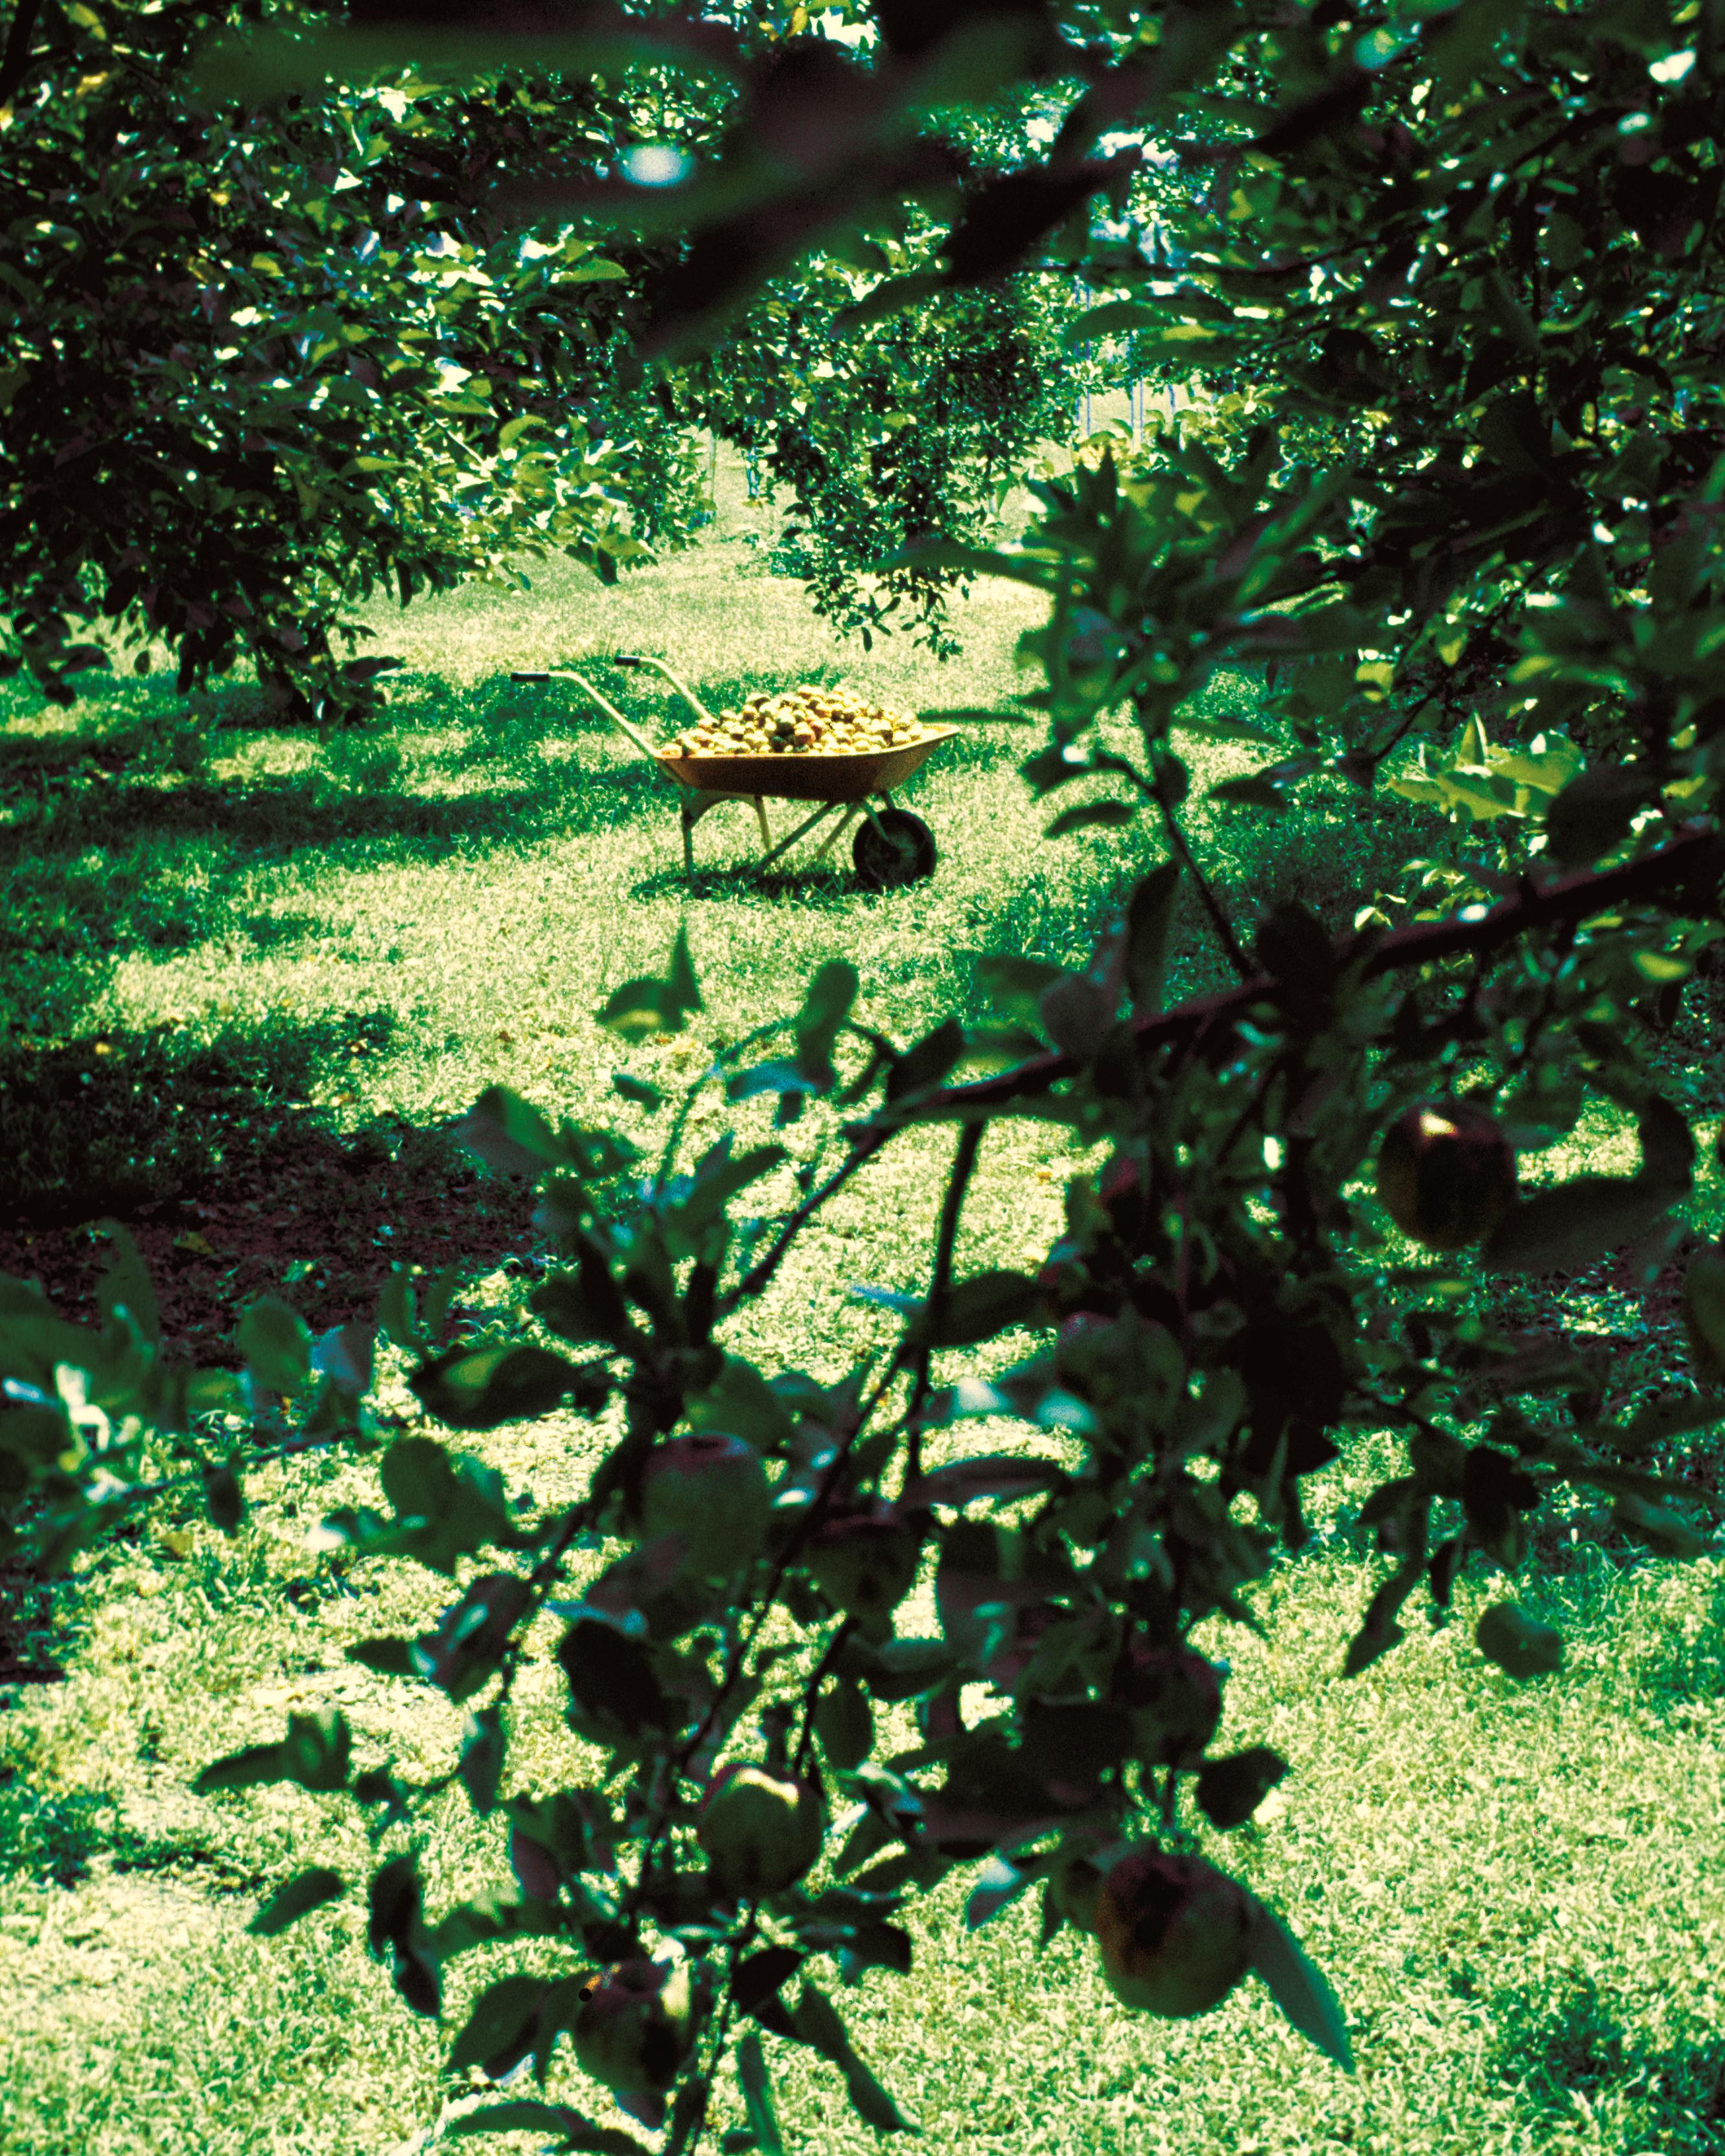 a photo peering between apple-tree branches at a wheel barrow full of apples in the distance><br/><br/>
		
				</div>


			</div>

		</div>
	</div>

	<div id=